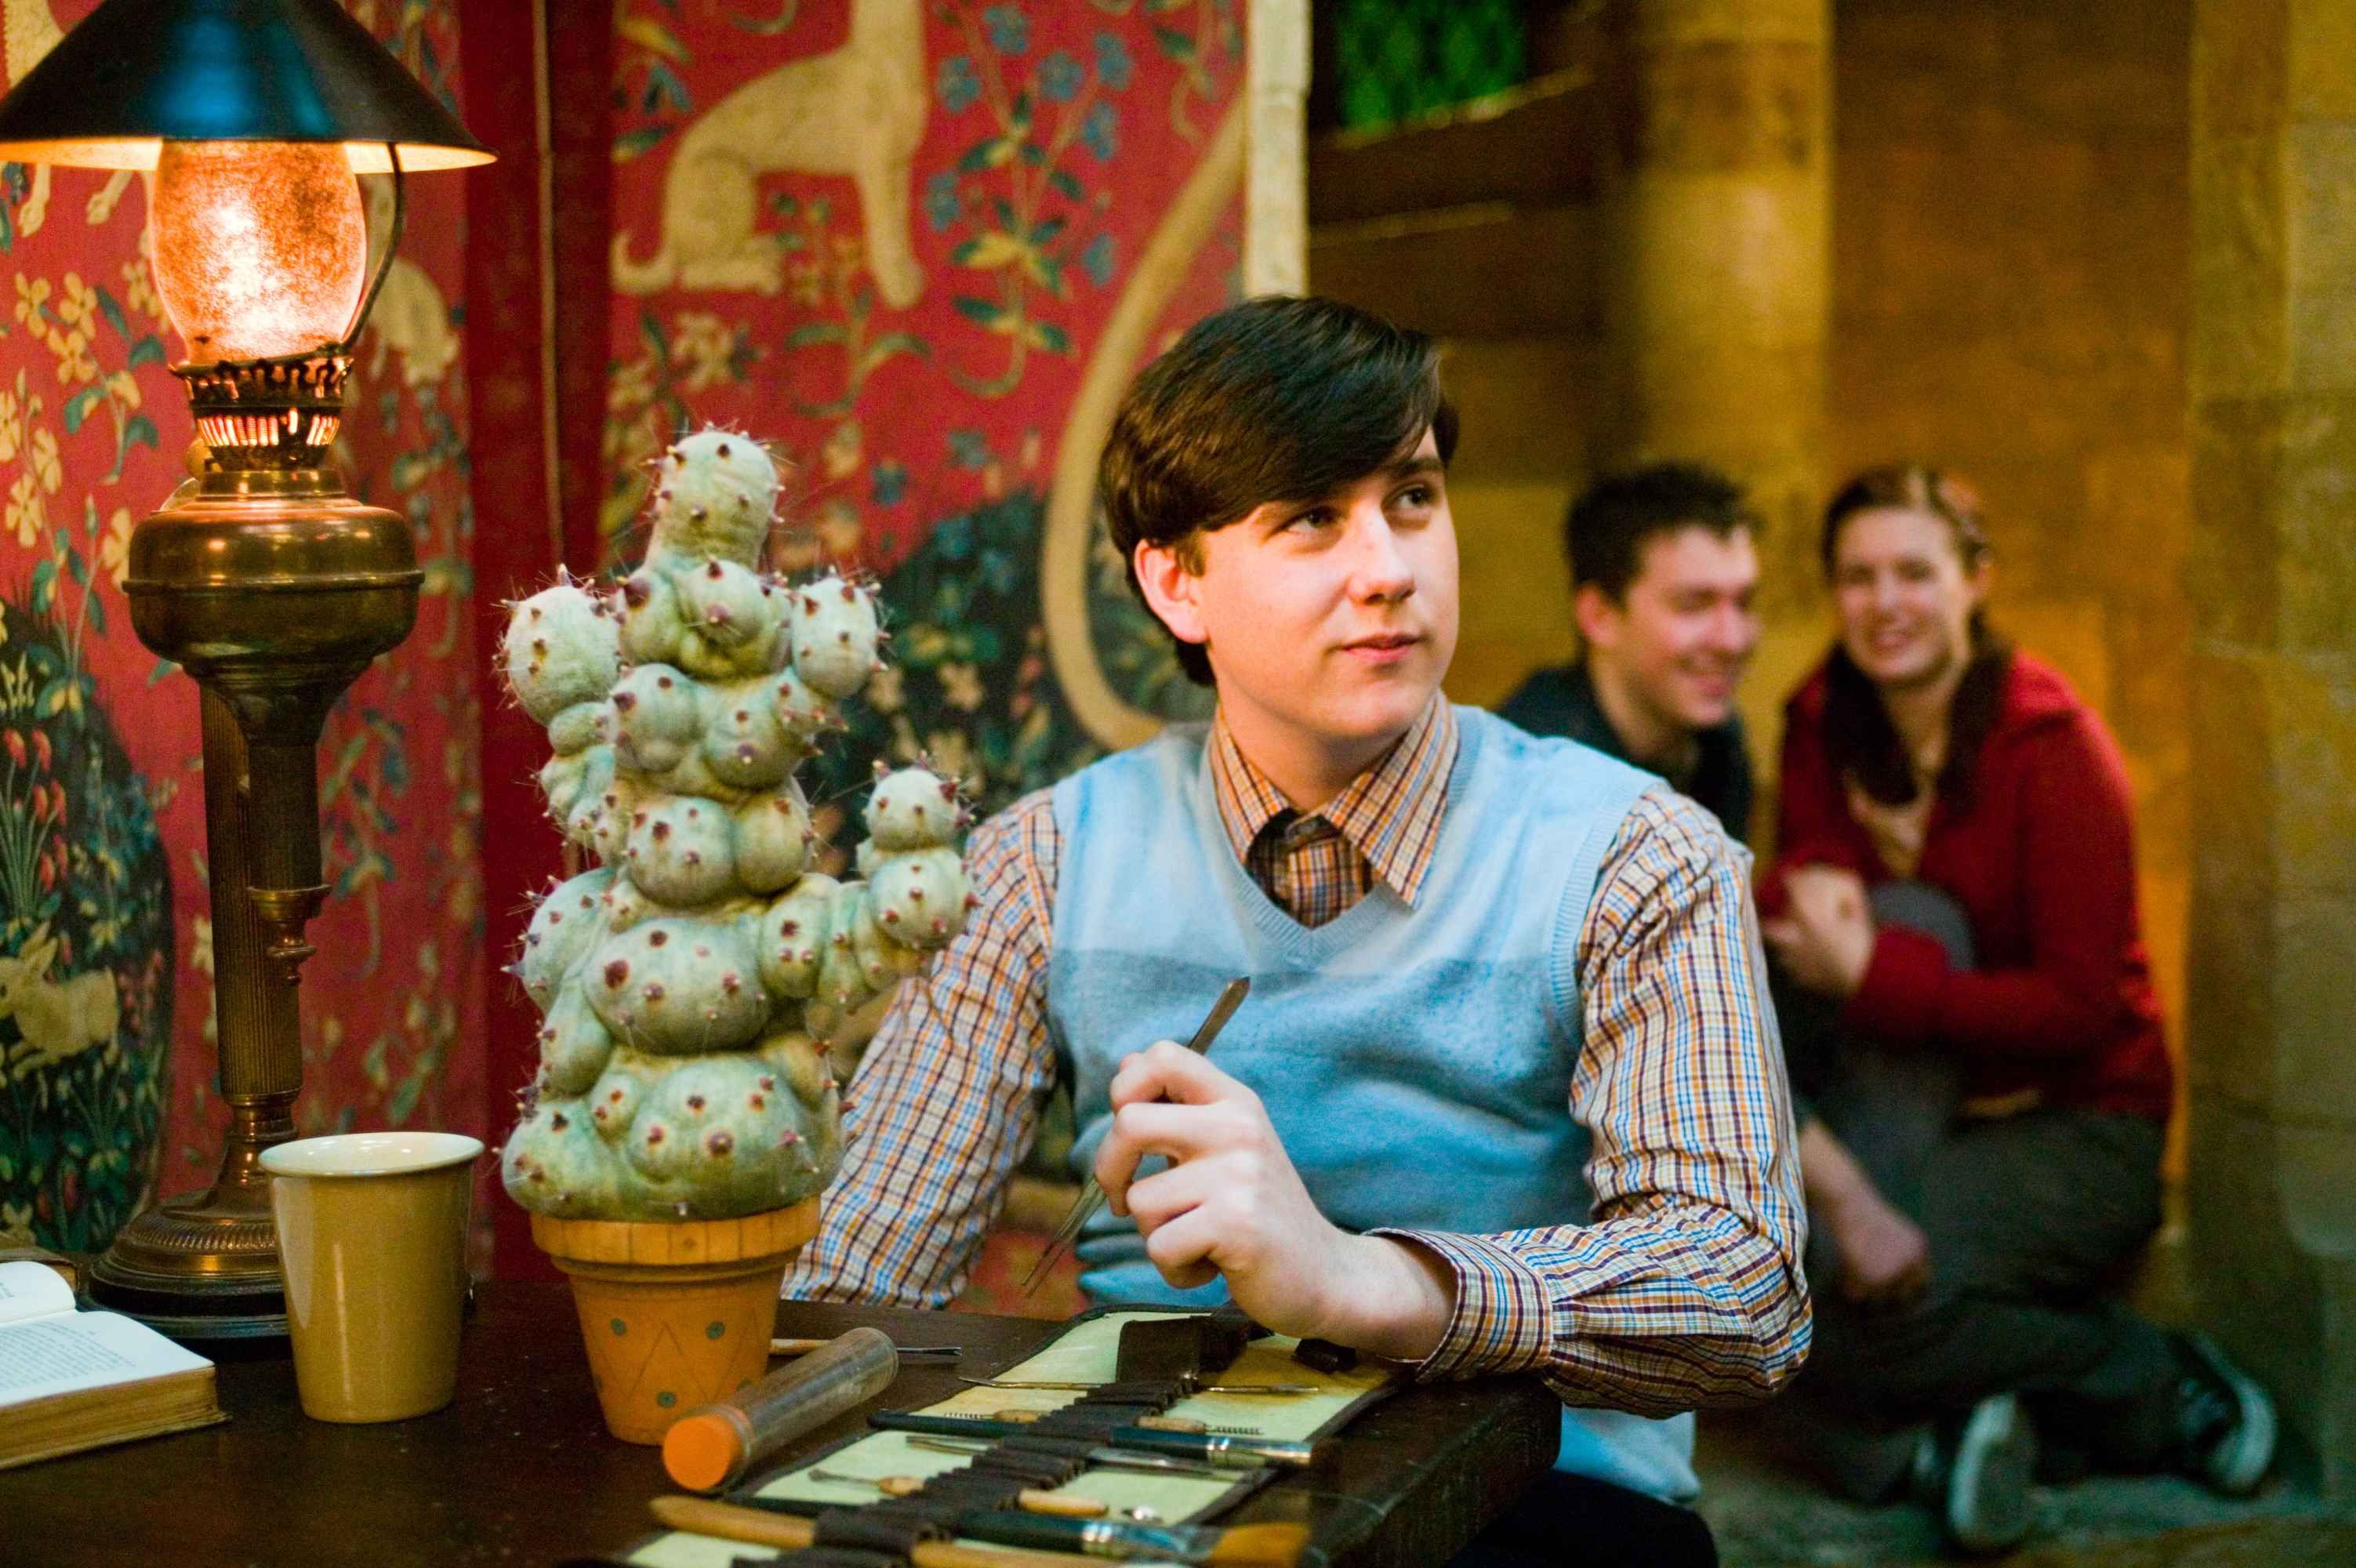 Harry Potter 10 Crucial Facts About Neville Longbottom The Films Leave Out